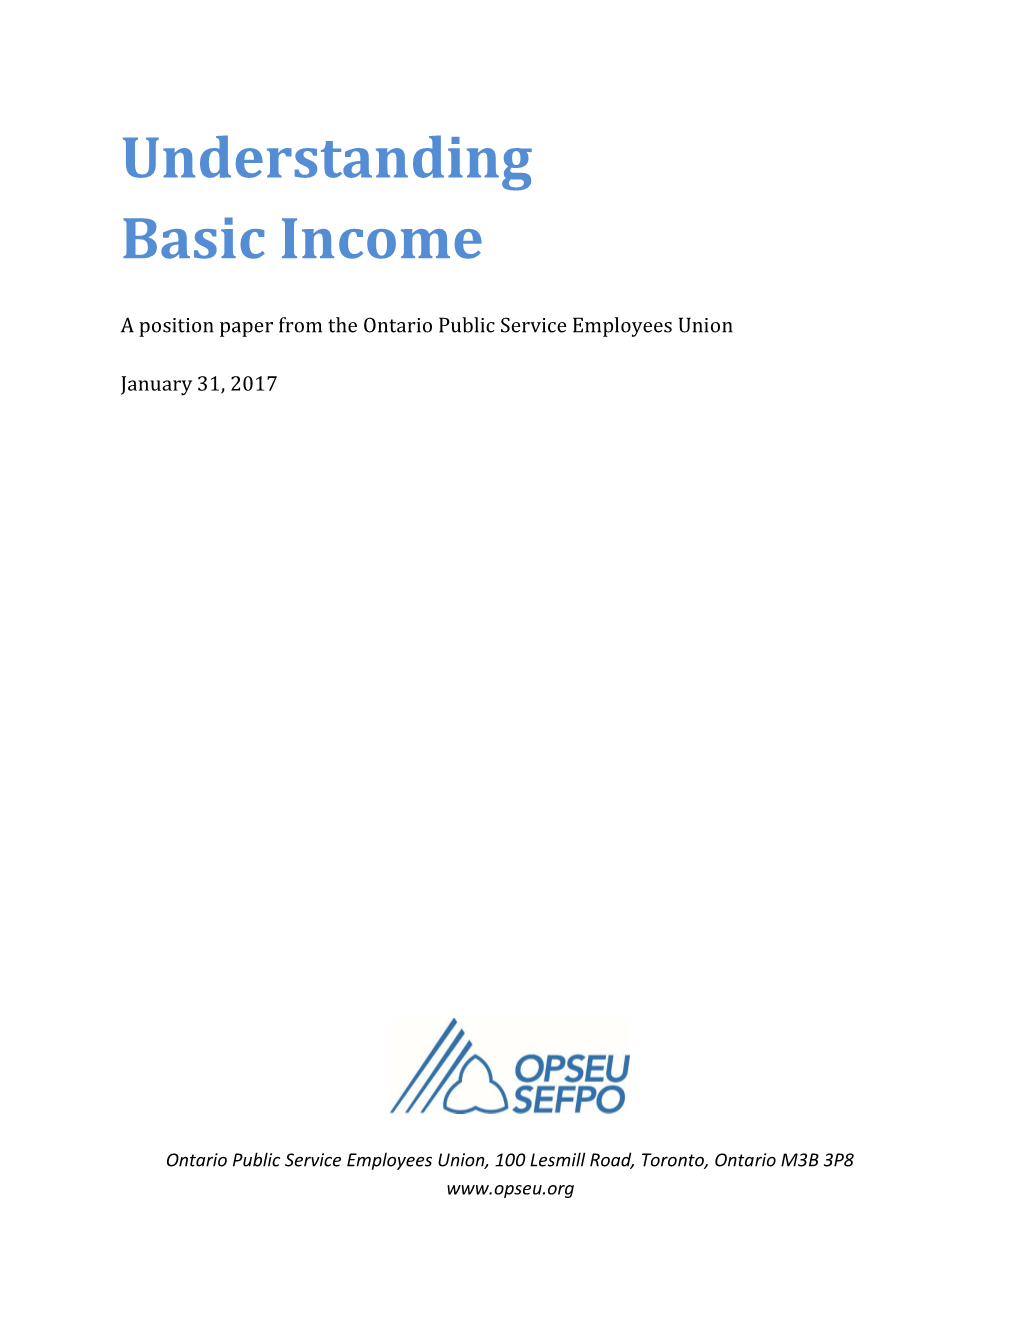 Understanding Basic Income